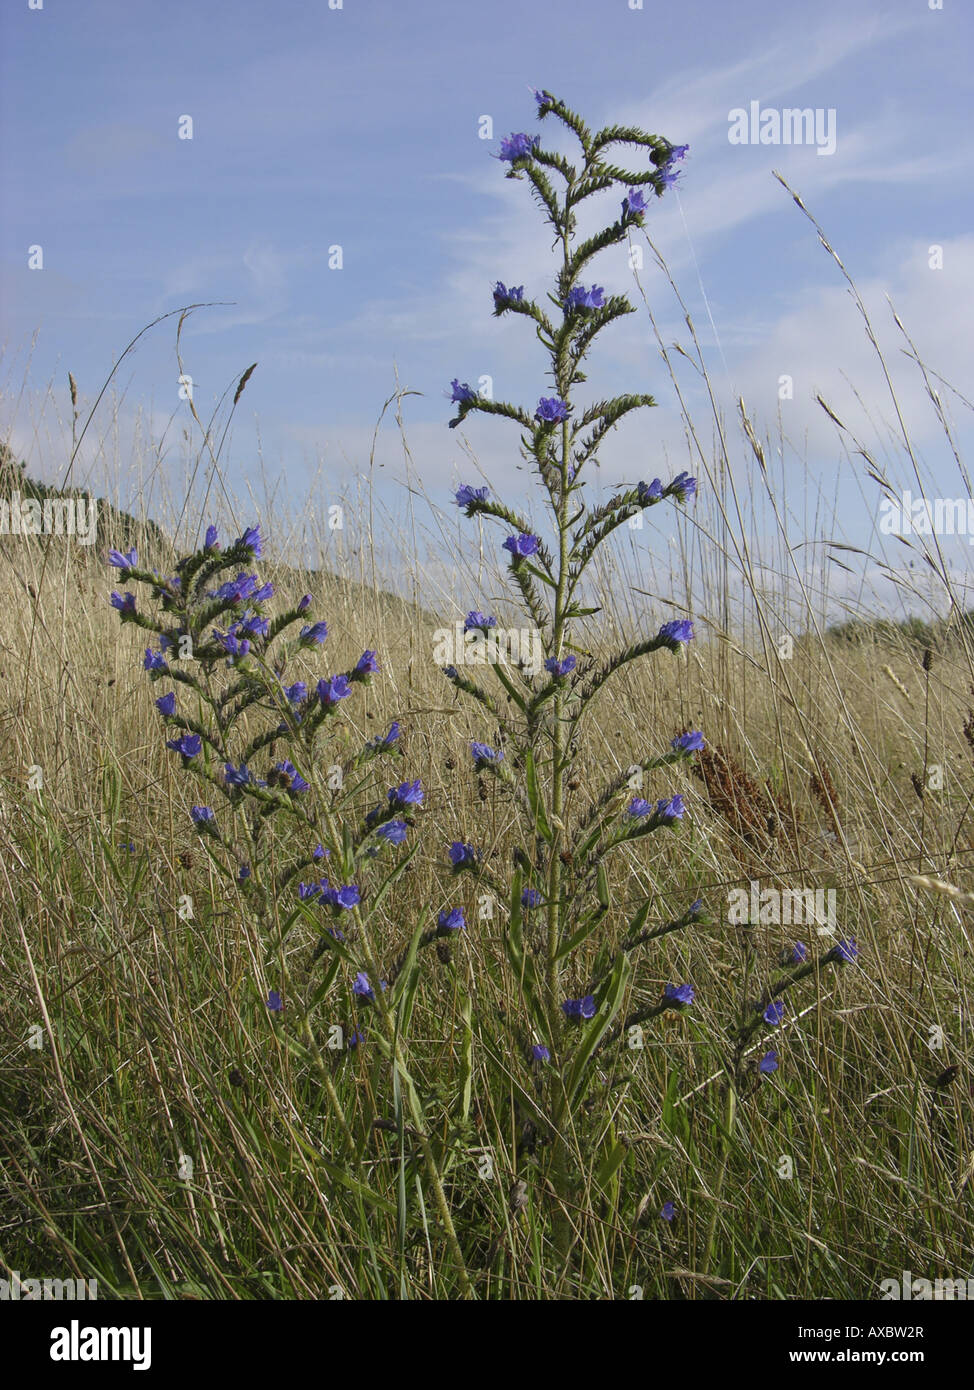 blueweed, blue devil, viper's bugloss, common viper's-bugloss (Echium vulgare), blooming plant on a meadow Stock Photo